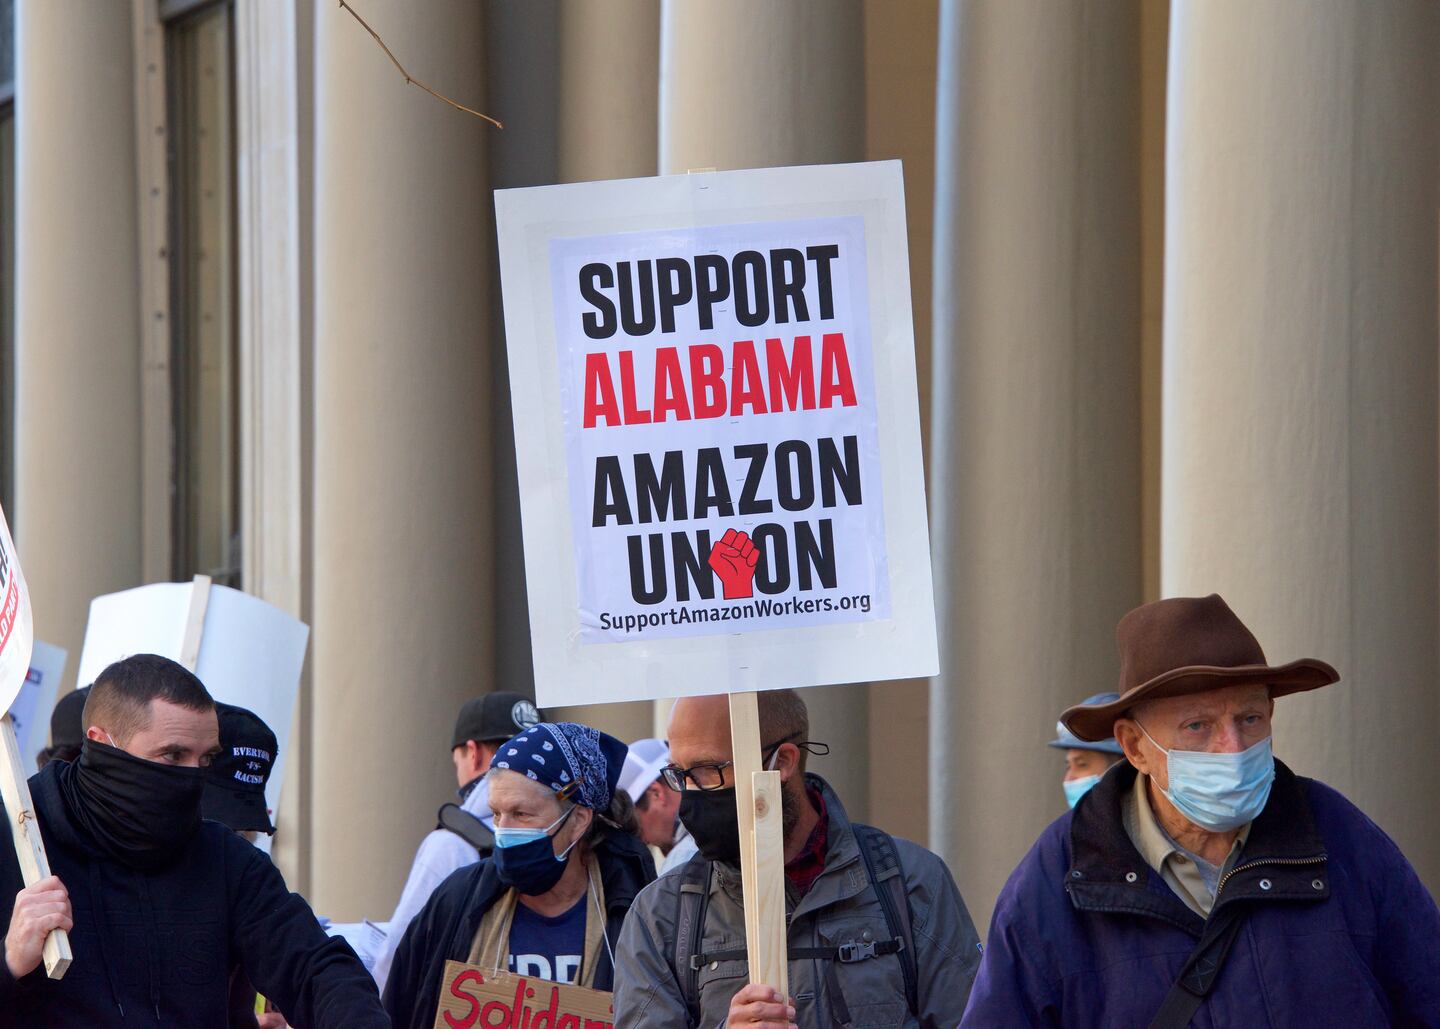 Protestors supporting Amazon workers' union efforts in March. Shutterstock